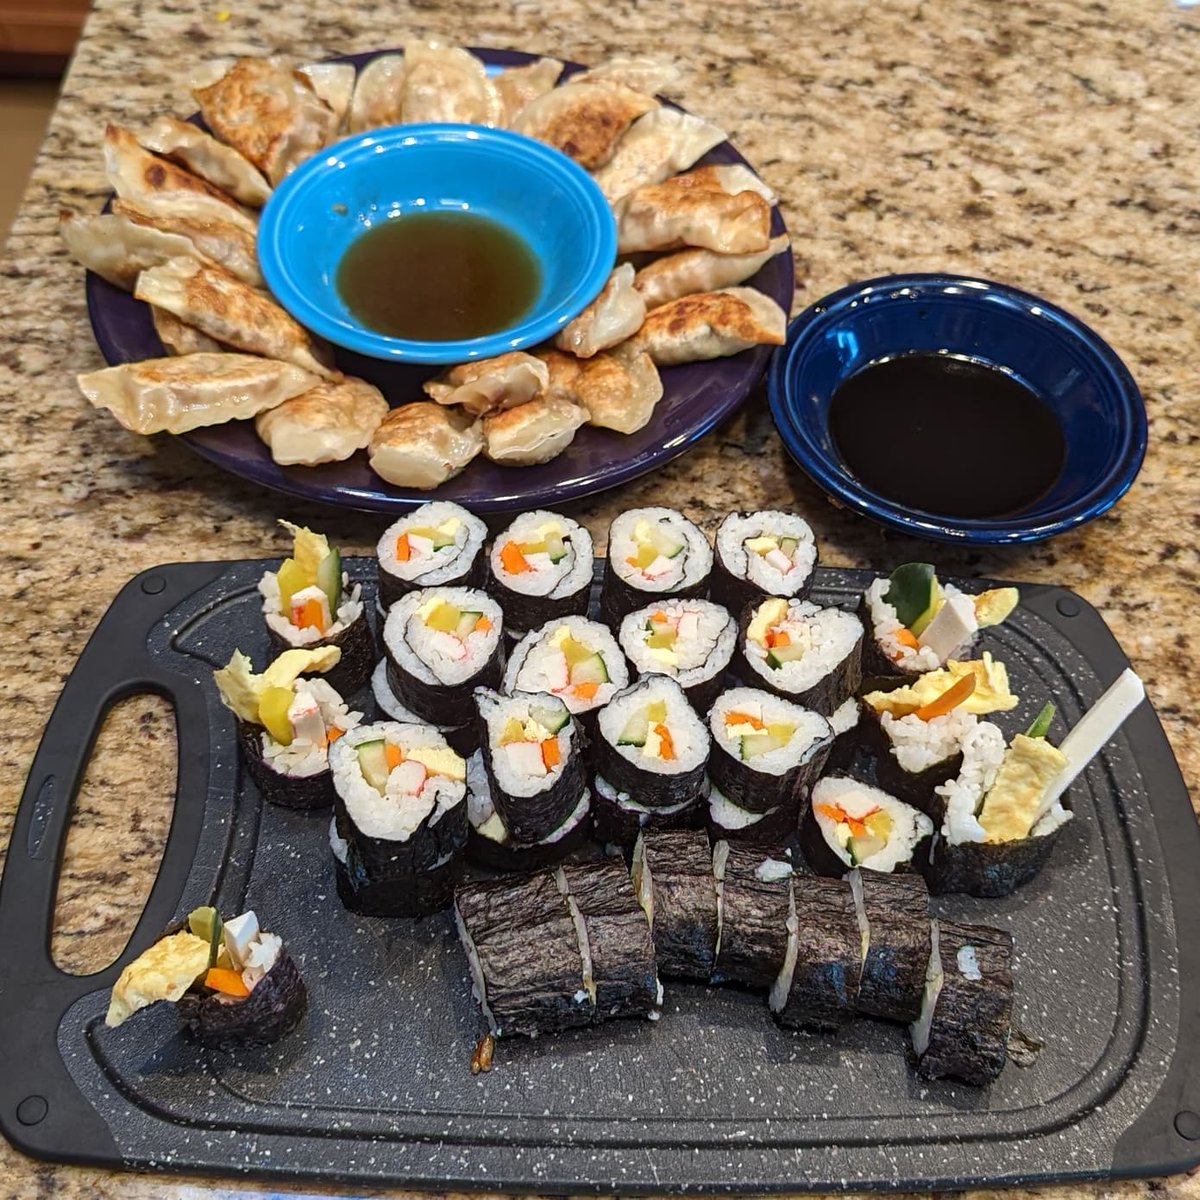 #MakerMonday! Share something you've created whether it's a hobby, work product, or anything else that you're proud of this week! These are Homemade Kimbap and Potstickers!